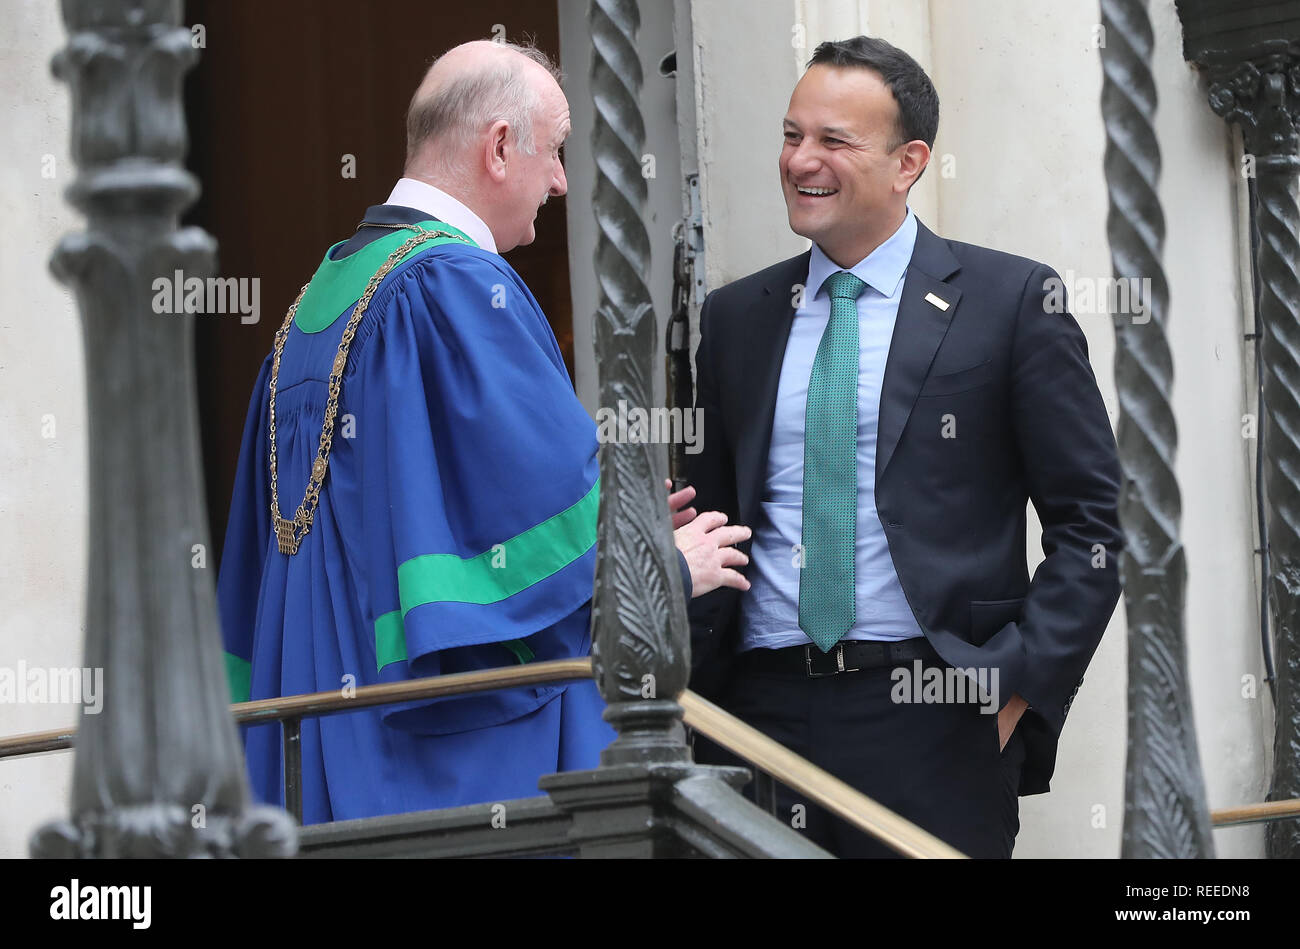 Dublin Lord Mayor Nial Ring (left) welcomes Taoiseach Leo Varadkar to the Mansion House in Dublin, for the centenary commemoration taking place to mark the inaugural public meeting of Dail Eireann in 1919. Stock Photo